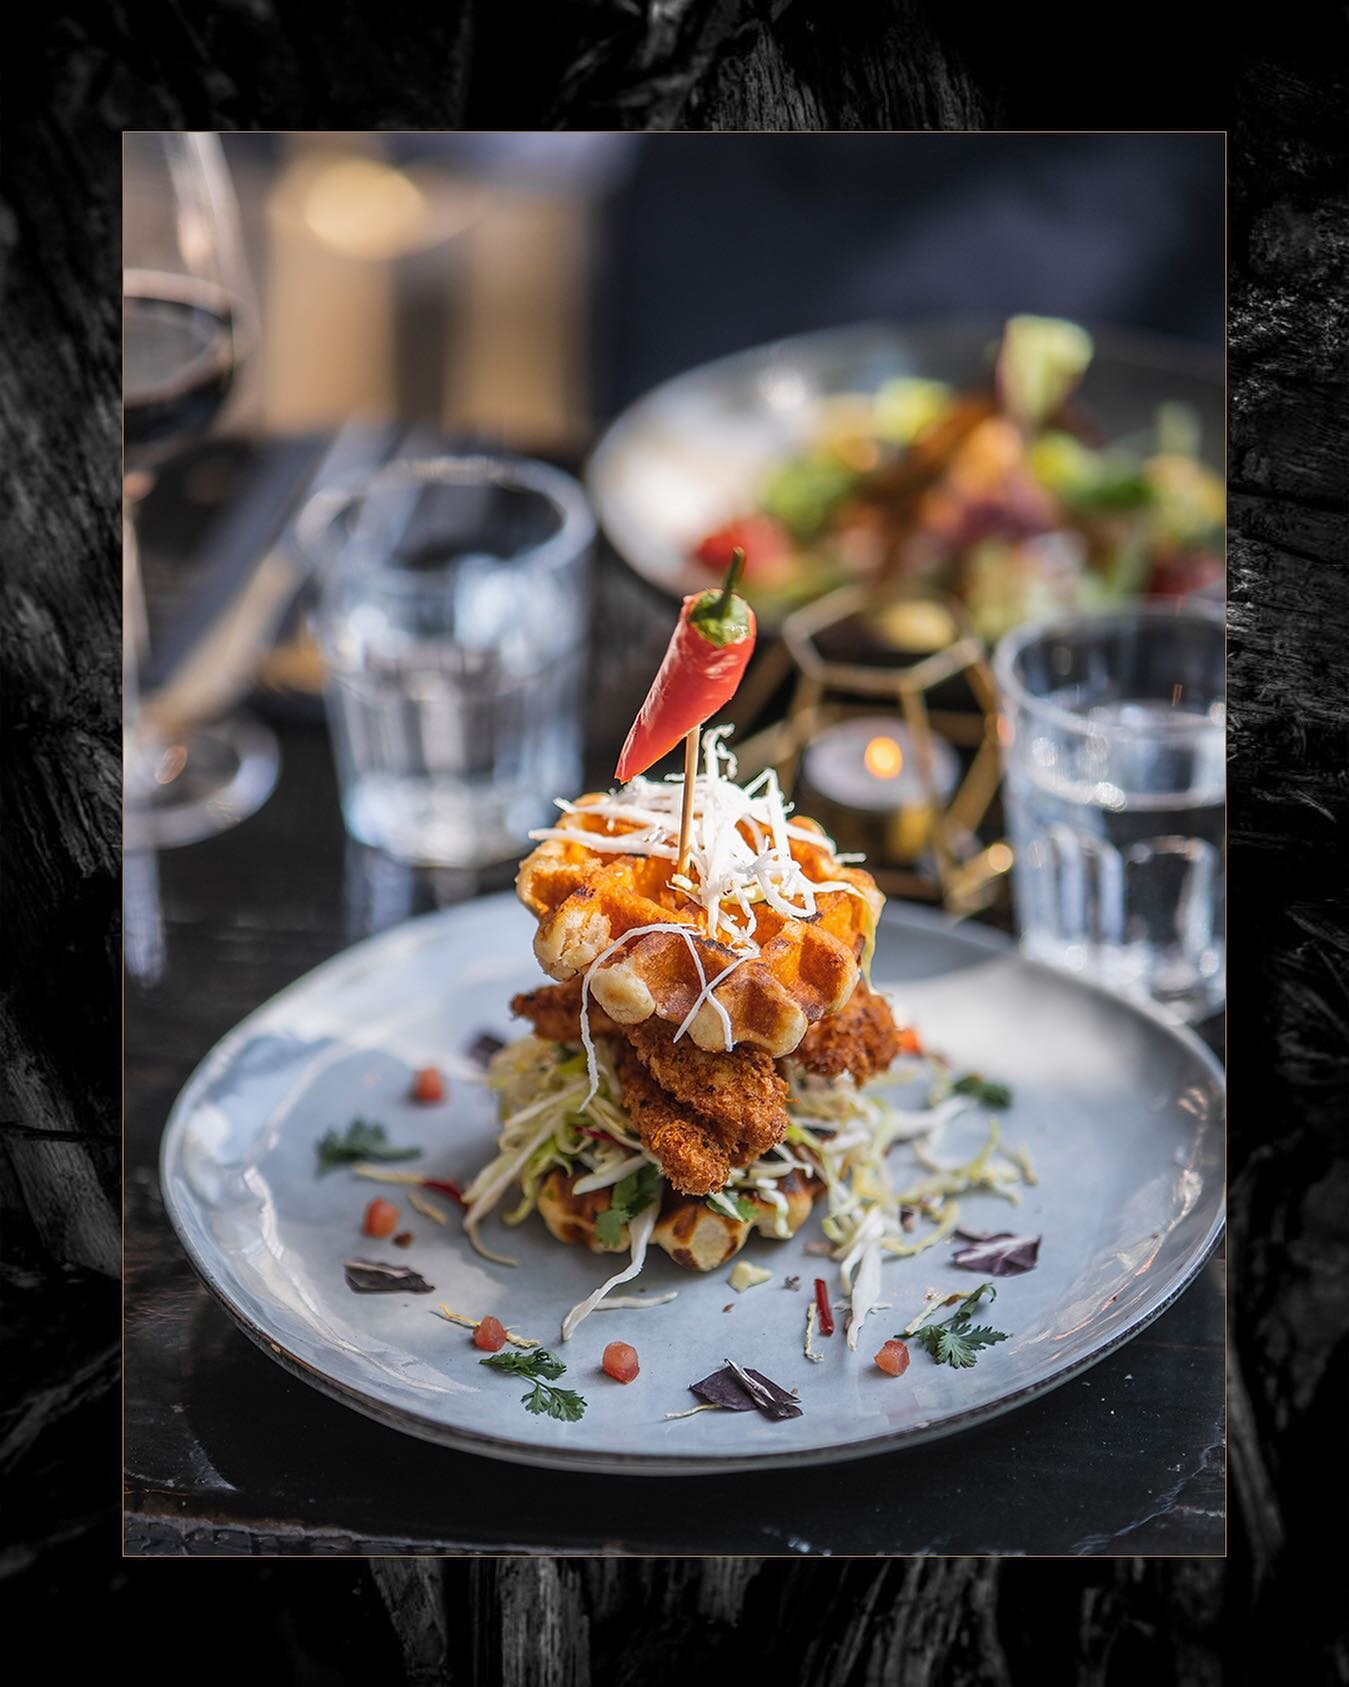 We cannot get enough of this dish..
Can you? 

&bull;⠀⠀⠀⠀⠀⠀⠀⠀⠀⁠
&bull;⠀⠀⠀⠀⠀⠀⠀⠀⠀⁠
&bull;⠀⠀⠀⠀⠀⠀⠀⠀⠀⁠
#indebuurtdelft #gemeentedelft #delft #delftcity #delftcentrum #lunch #lunchtime #bbq #bbqfood #bbqchicken #seafood #seafoodlovers #seafoodbbq #lunch #d